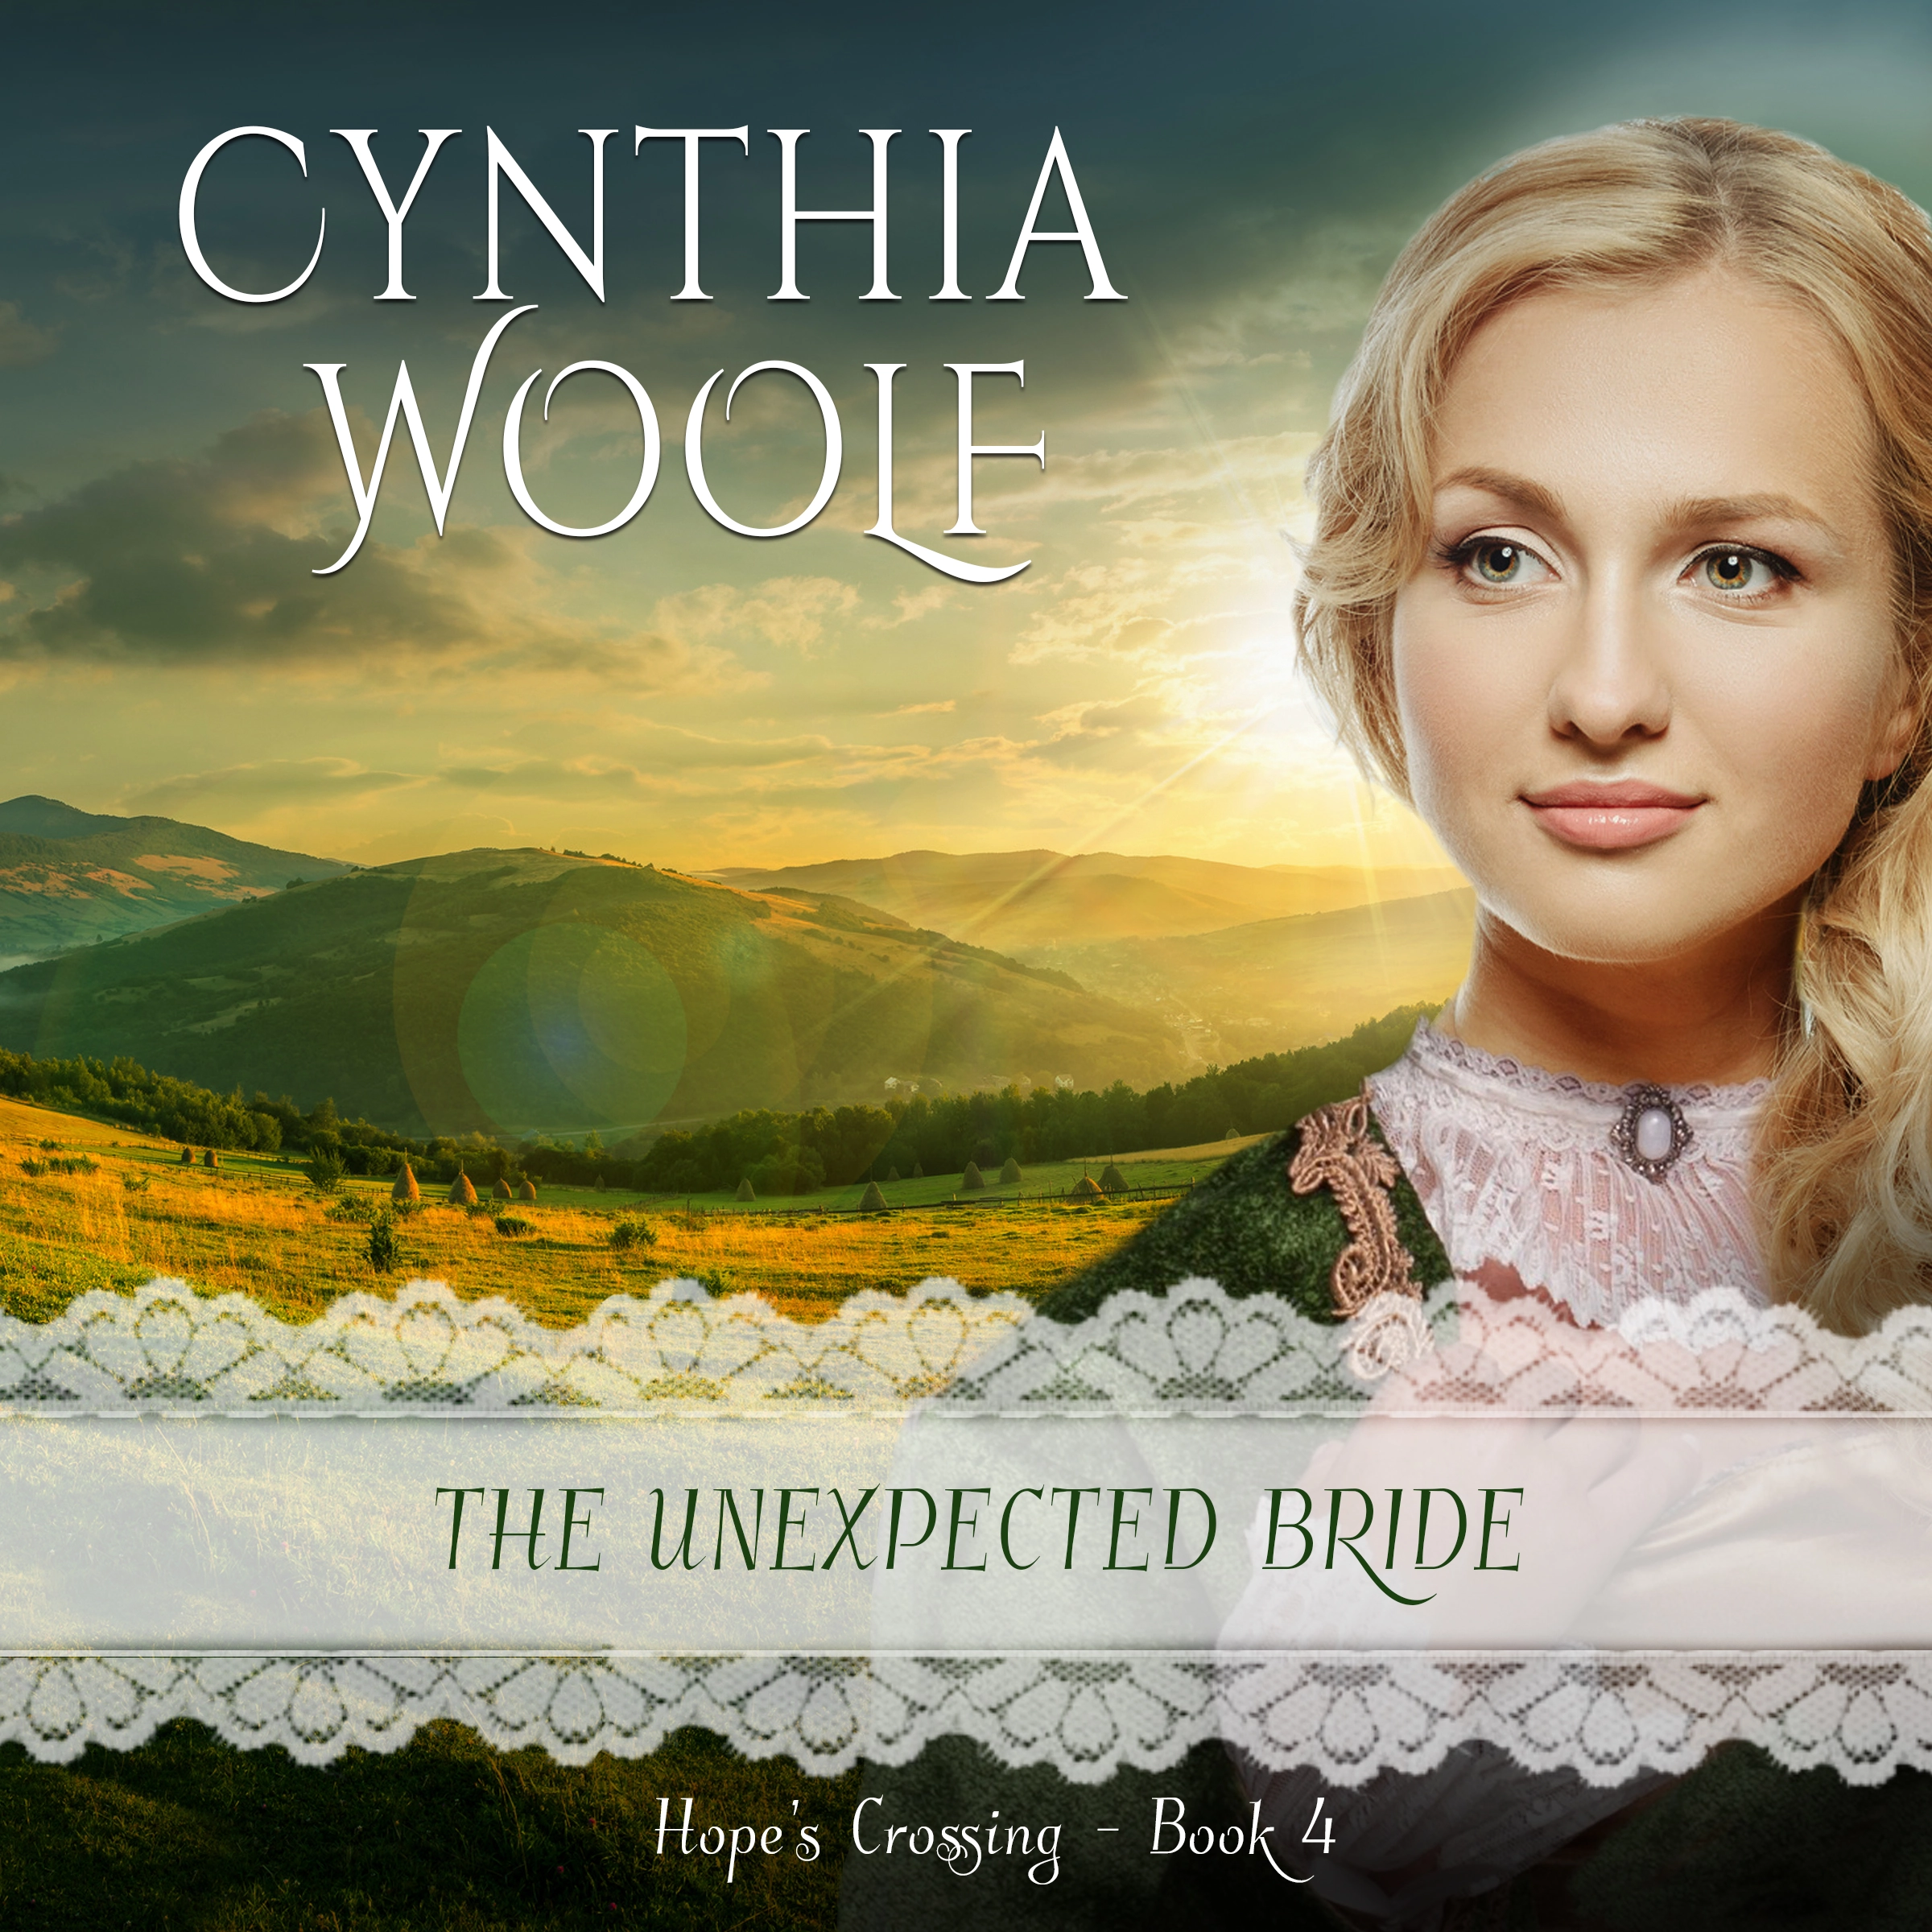 The Unexpected Bride Audiobook by Cynthia Woolf